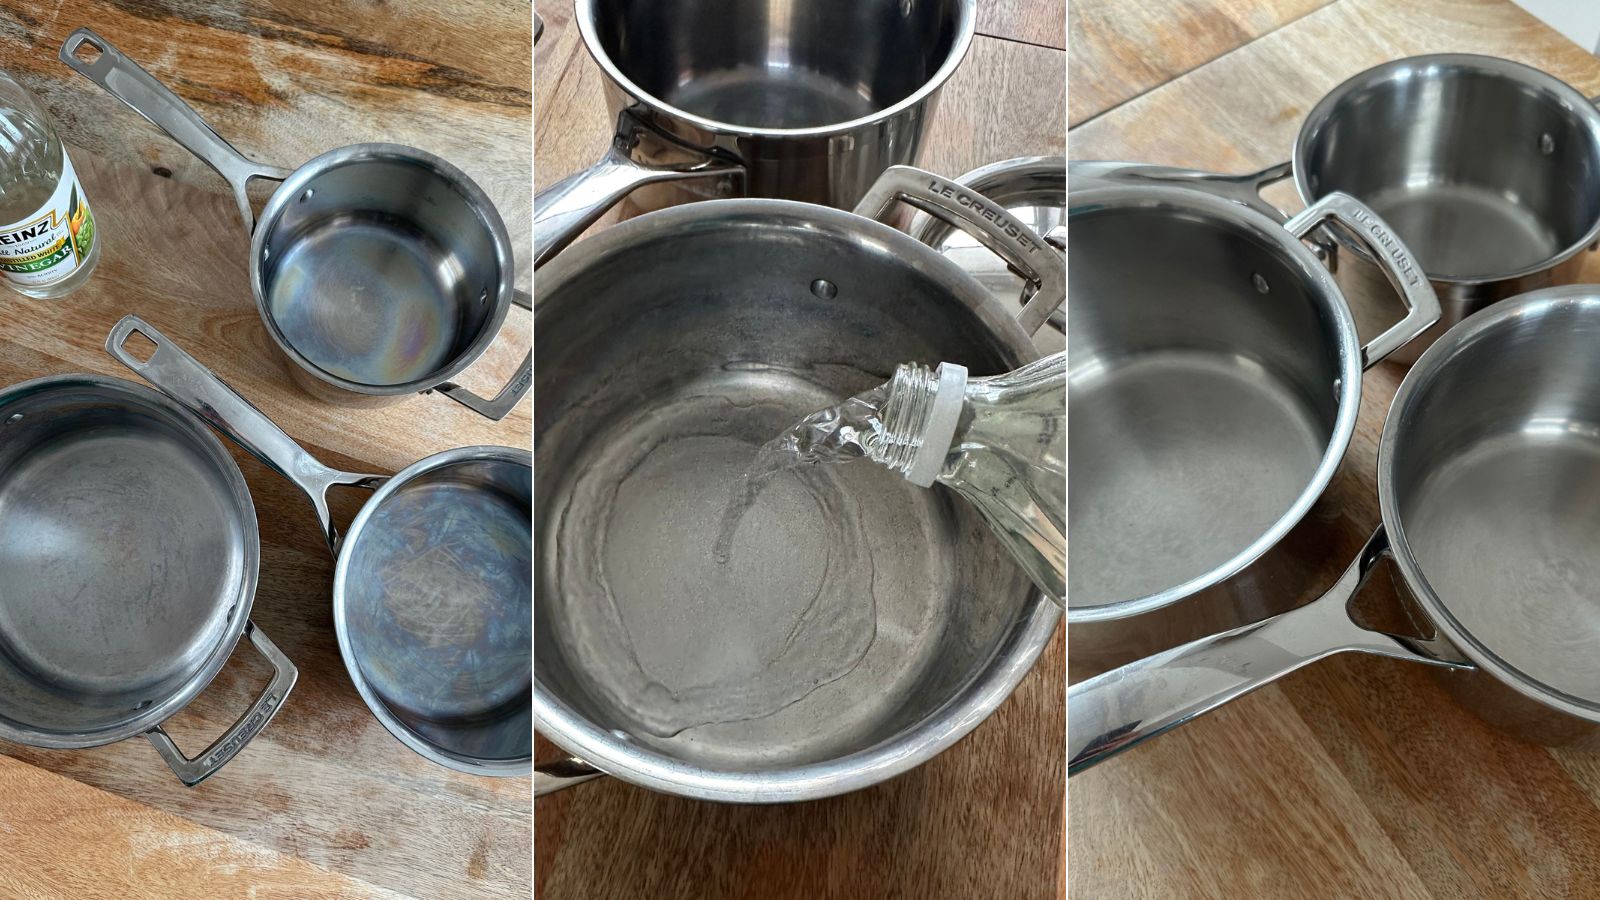 How to clean stainless steel pans with vinegar |